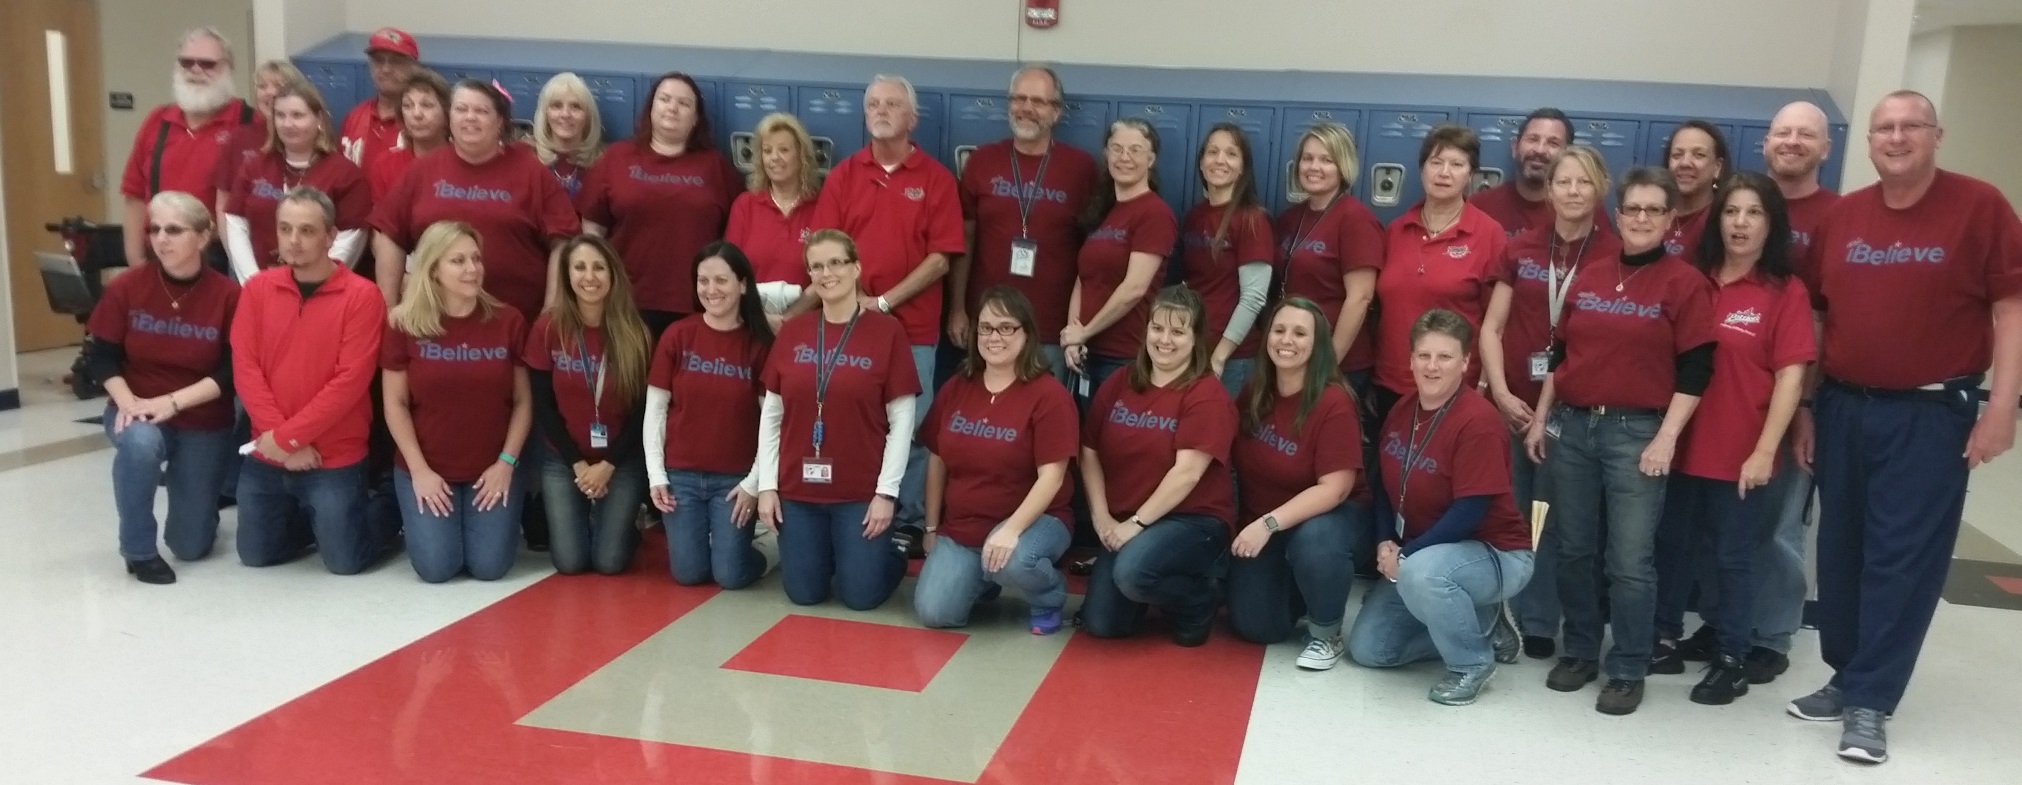 Employees at Bayonet Point Middle School Participating in National Wear Red Day